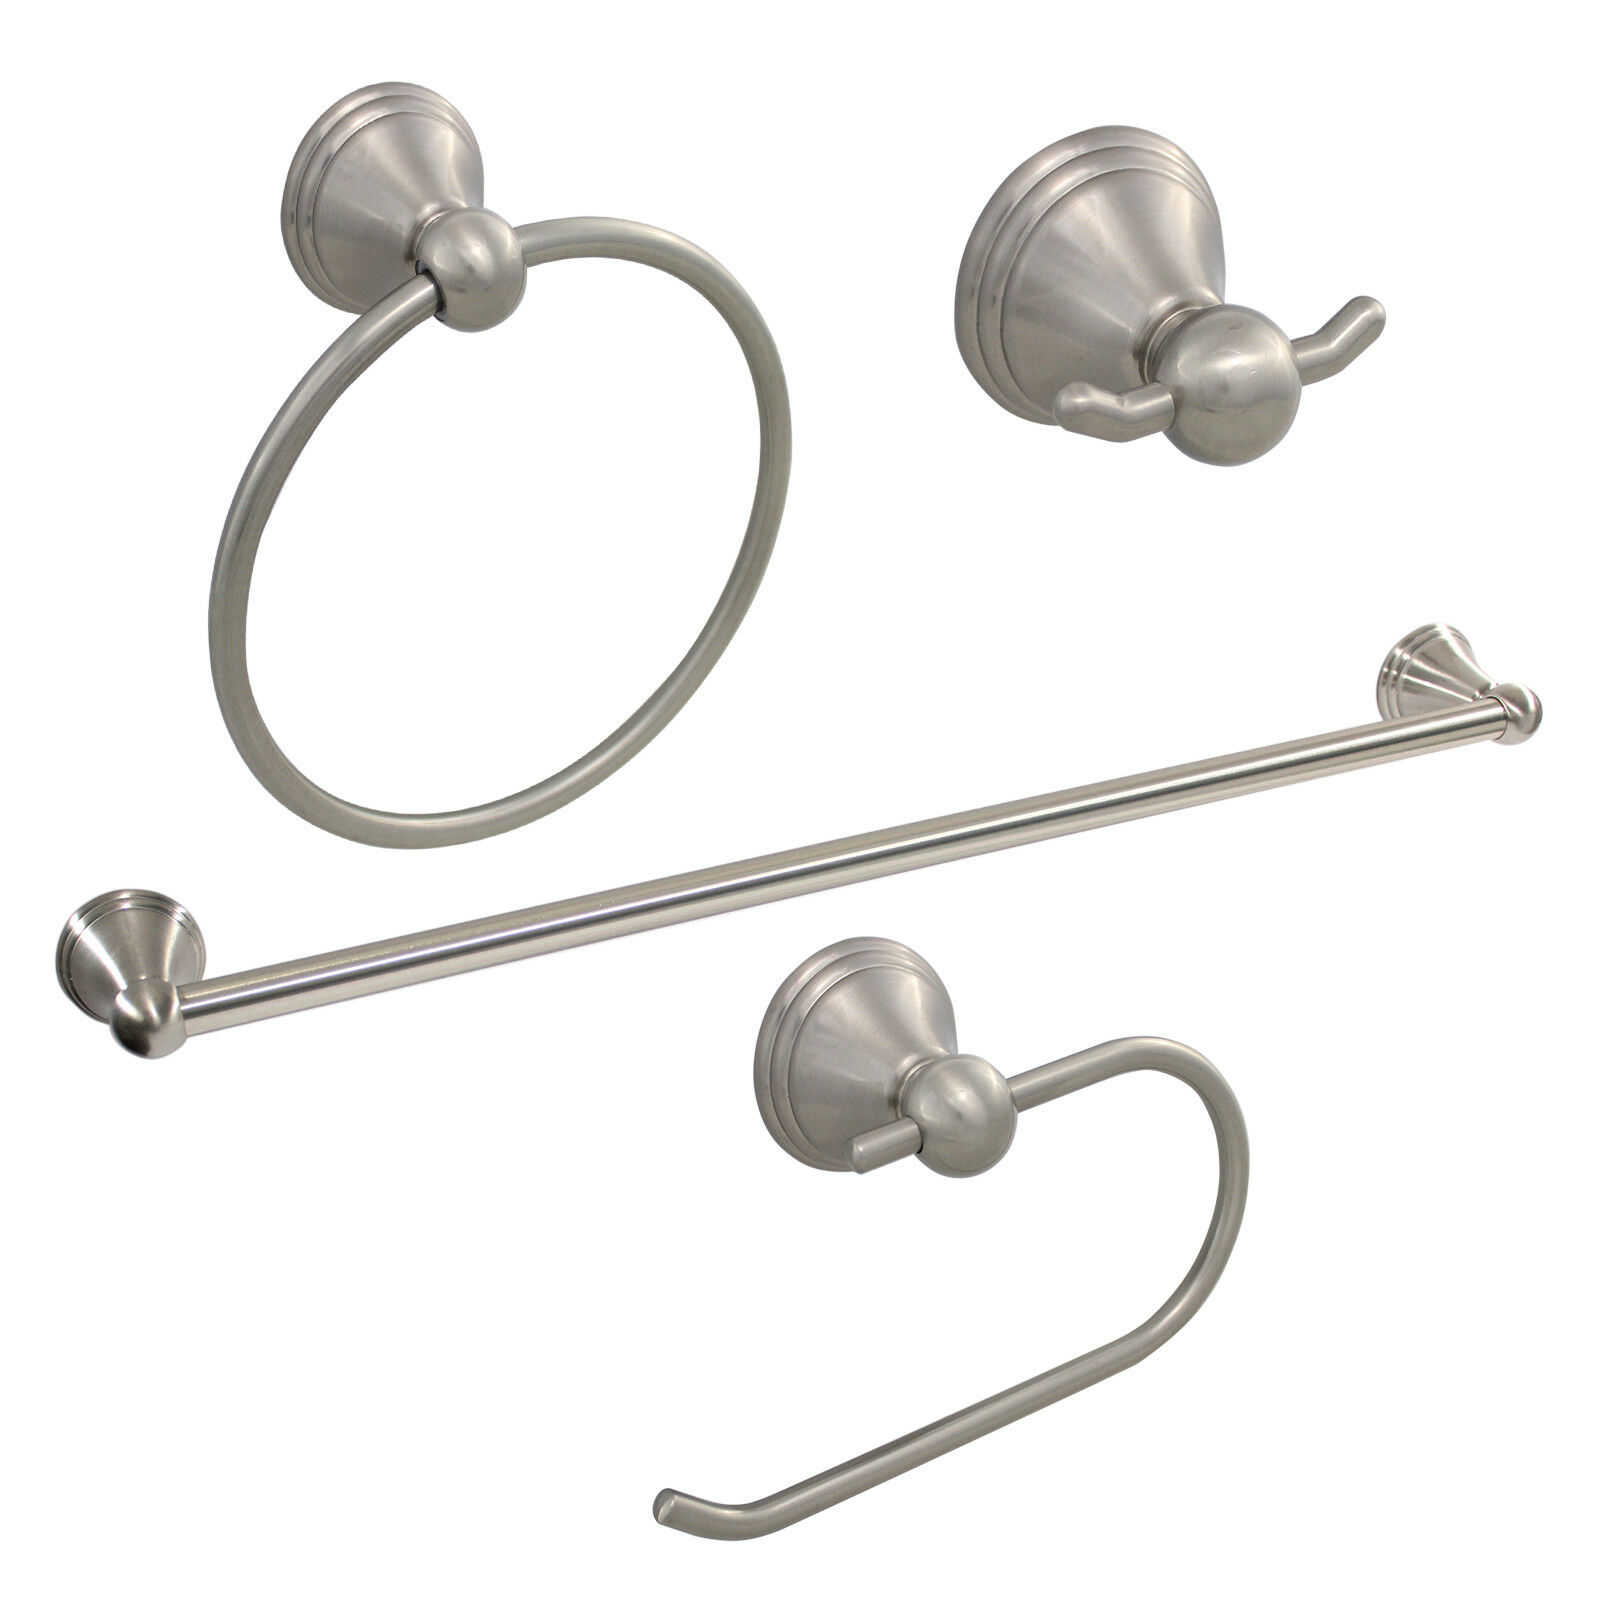 4 Piece Bathroom Hardware Accessories Set With 24" Towel Bar - Brushed Nickel